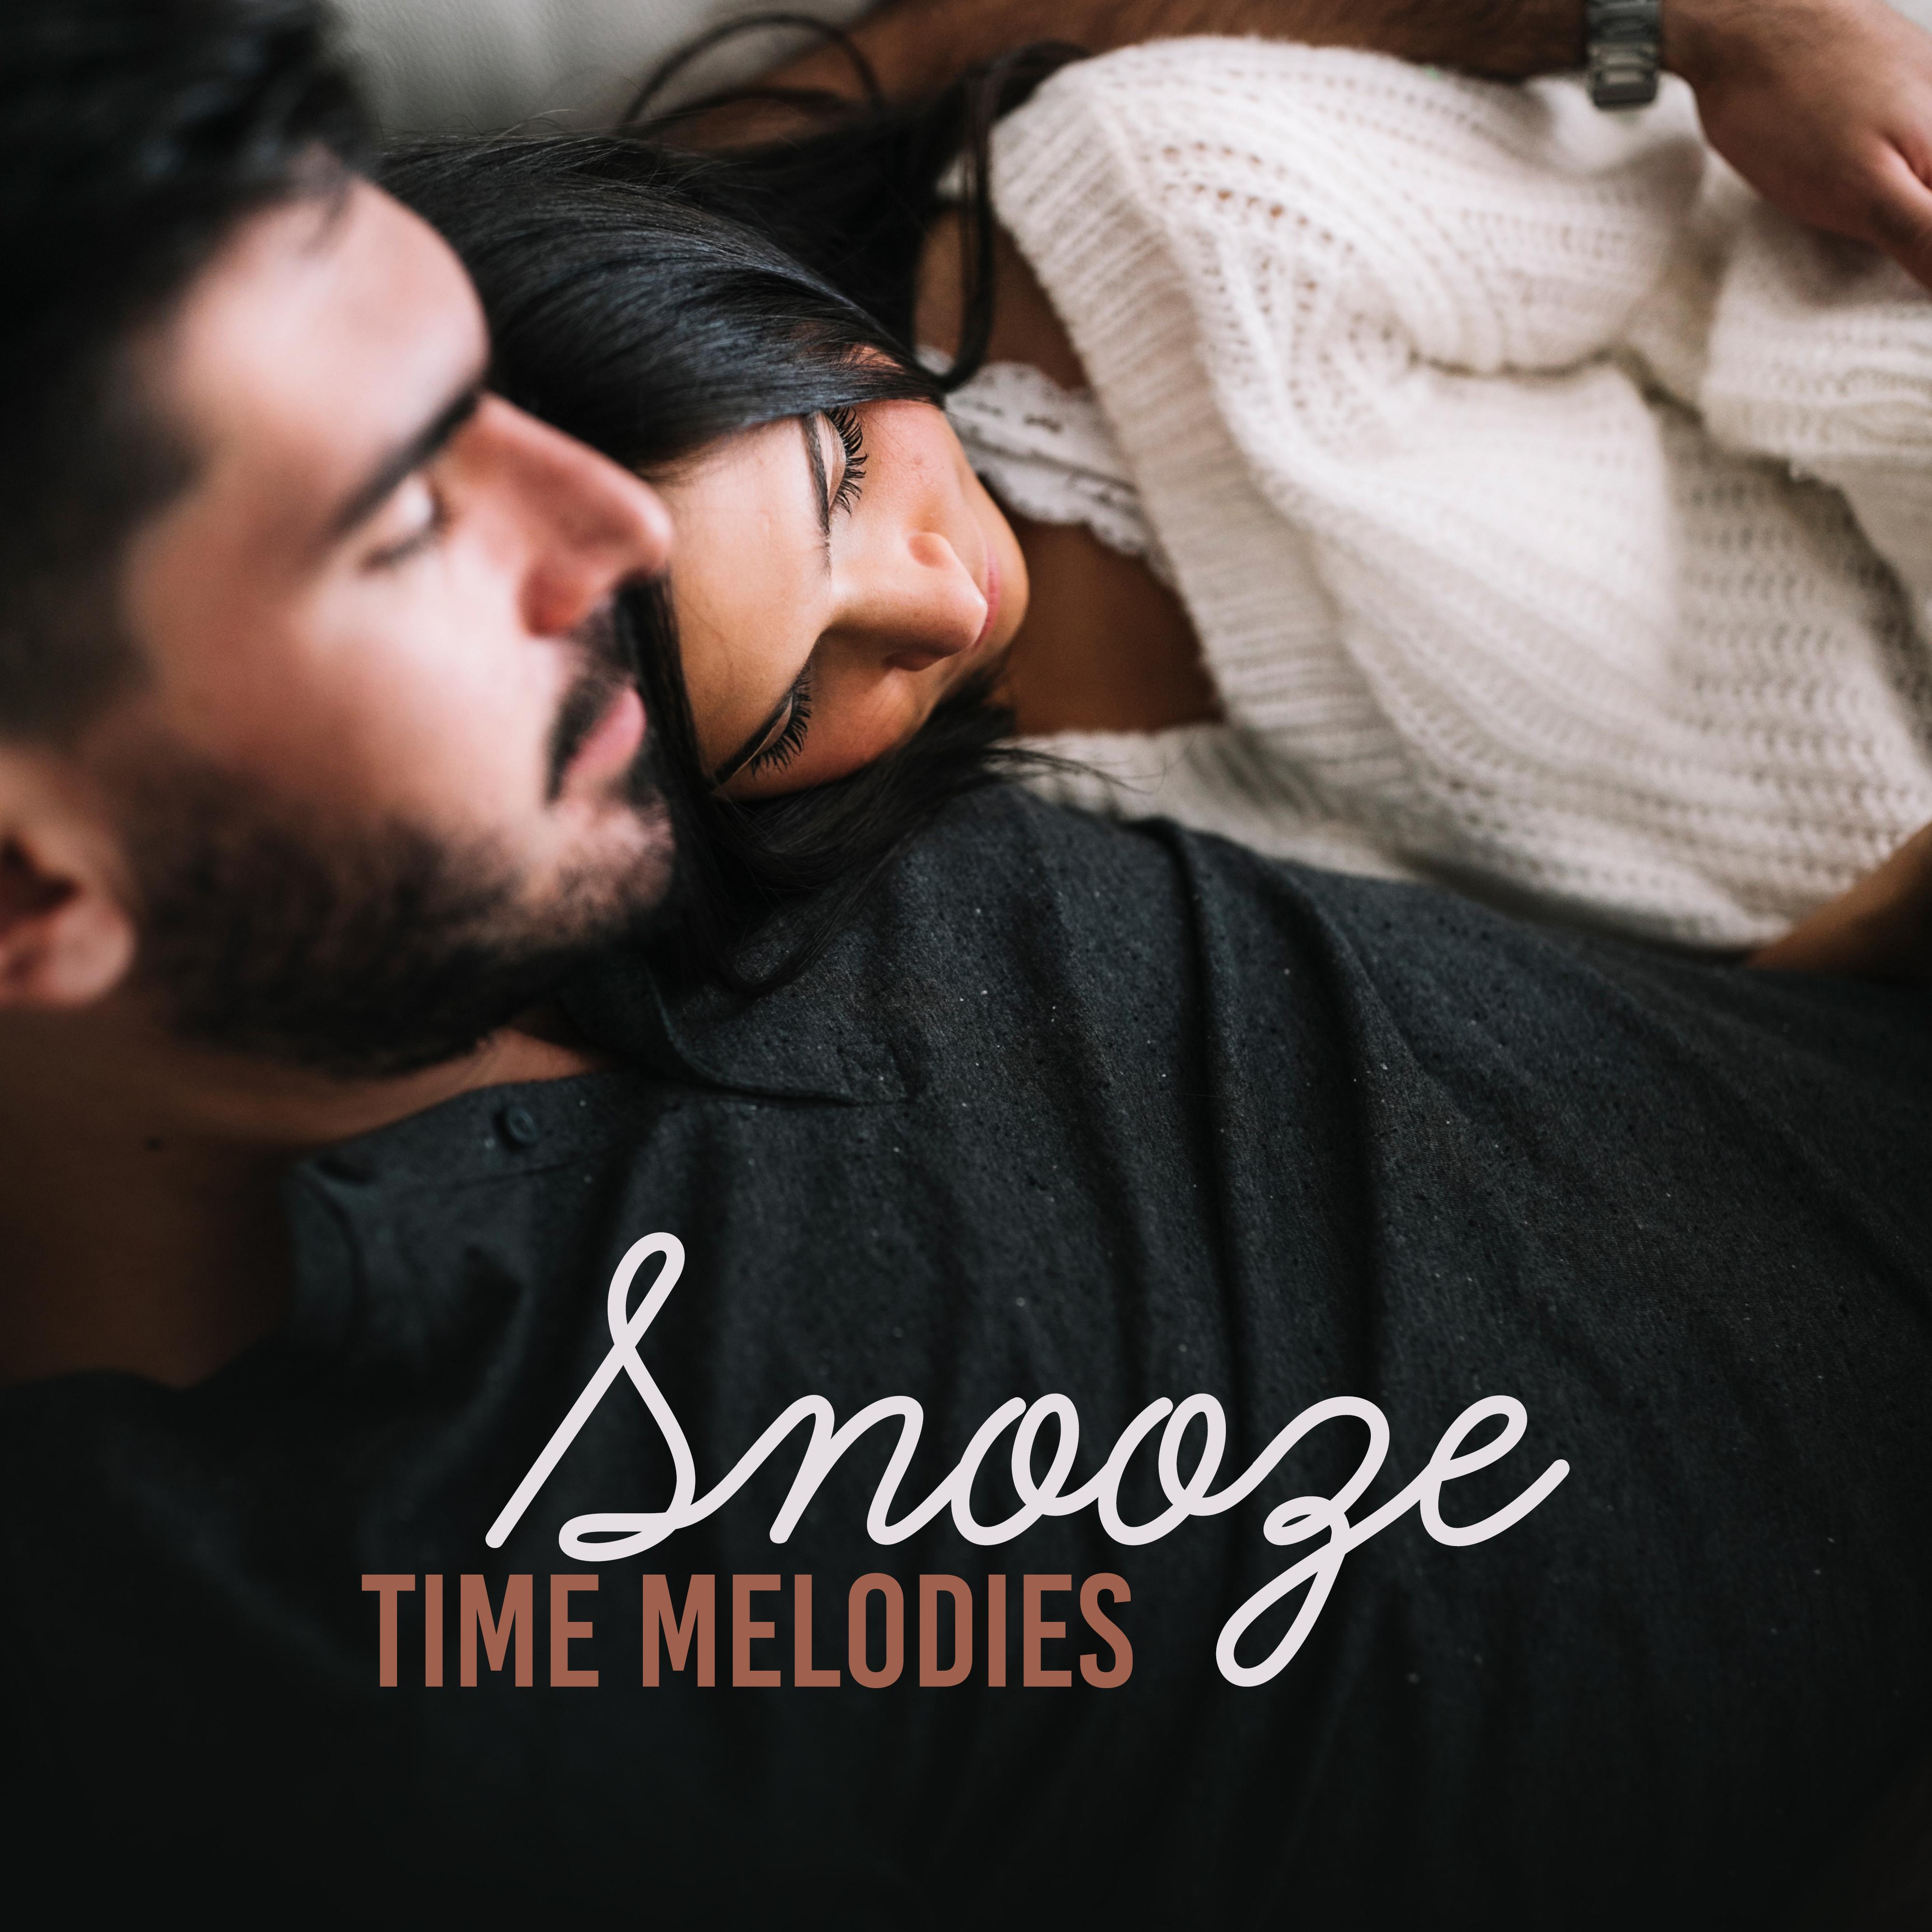 Snooze Time Melodies